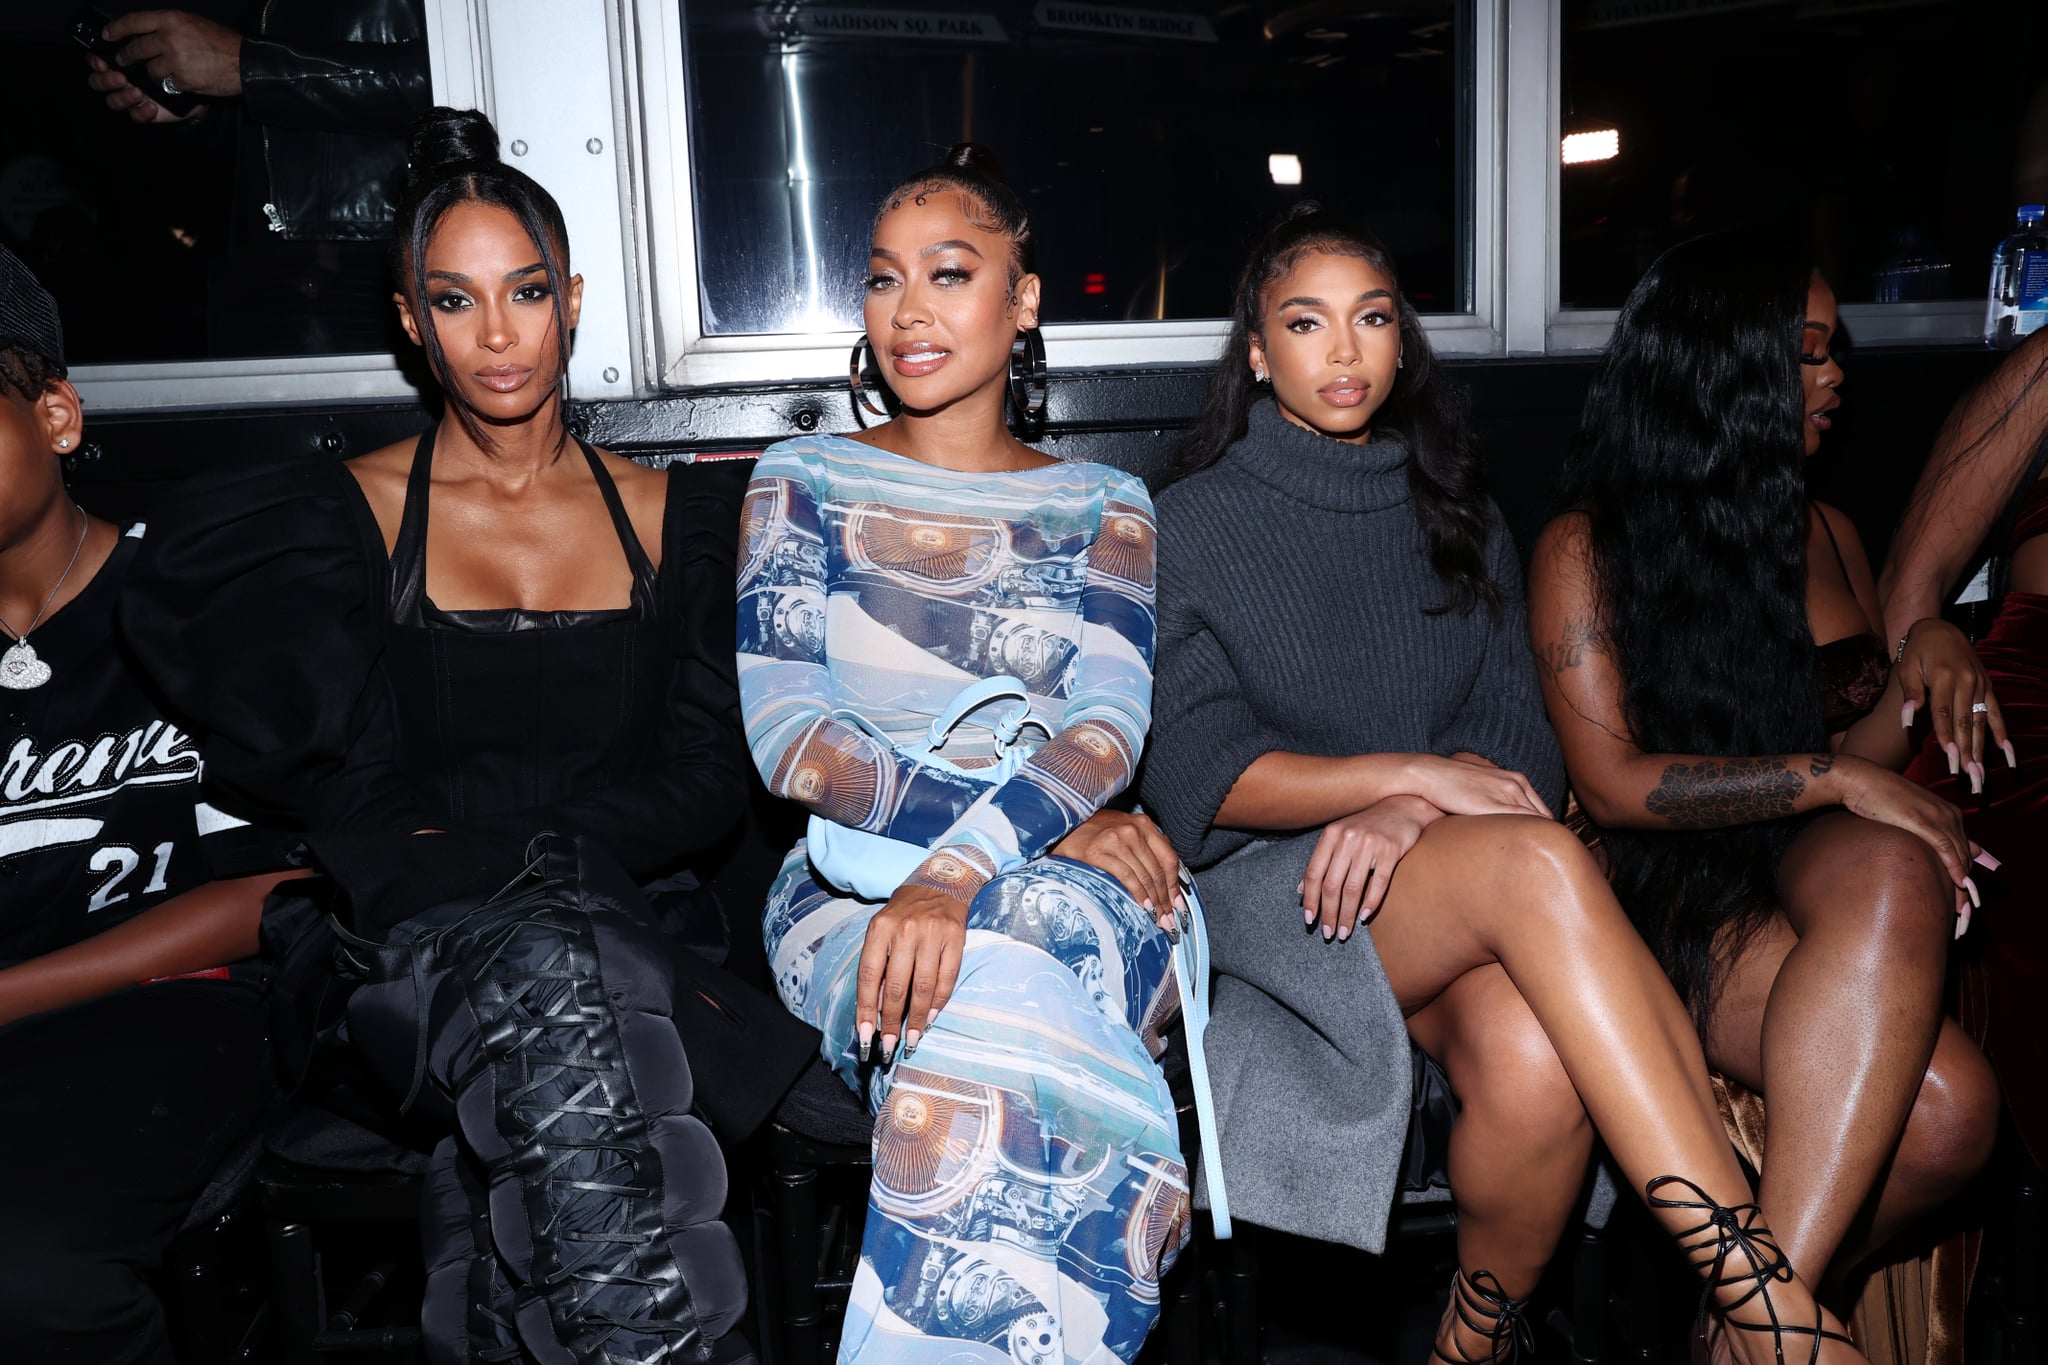 NEW YORK, NEW YORK - SEPTEMBER 09: Ciara, La La and Lori Harvey attend front row for Laquan Smith during NYFW: The Shows on September 09, 2021 in New York City. (Photo by Cindy Ord/Getty Images)